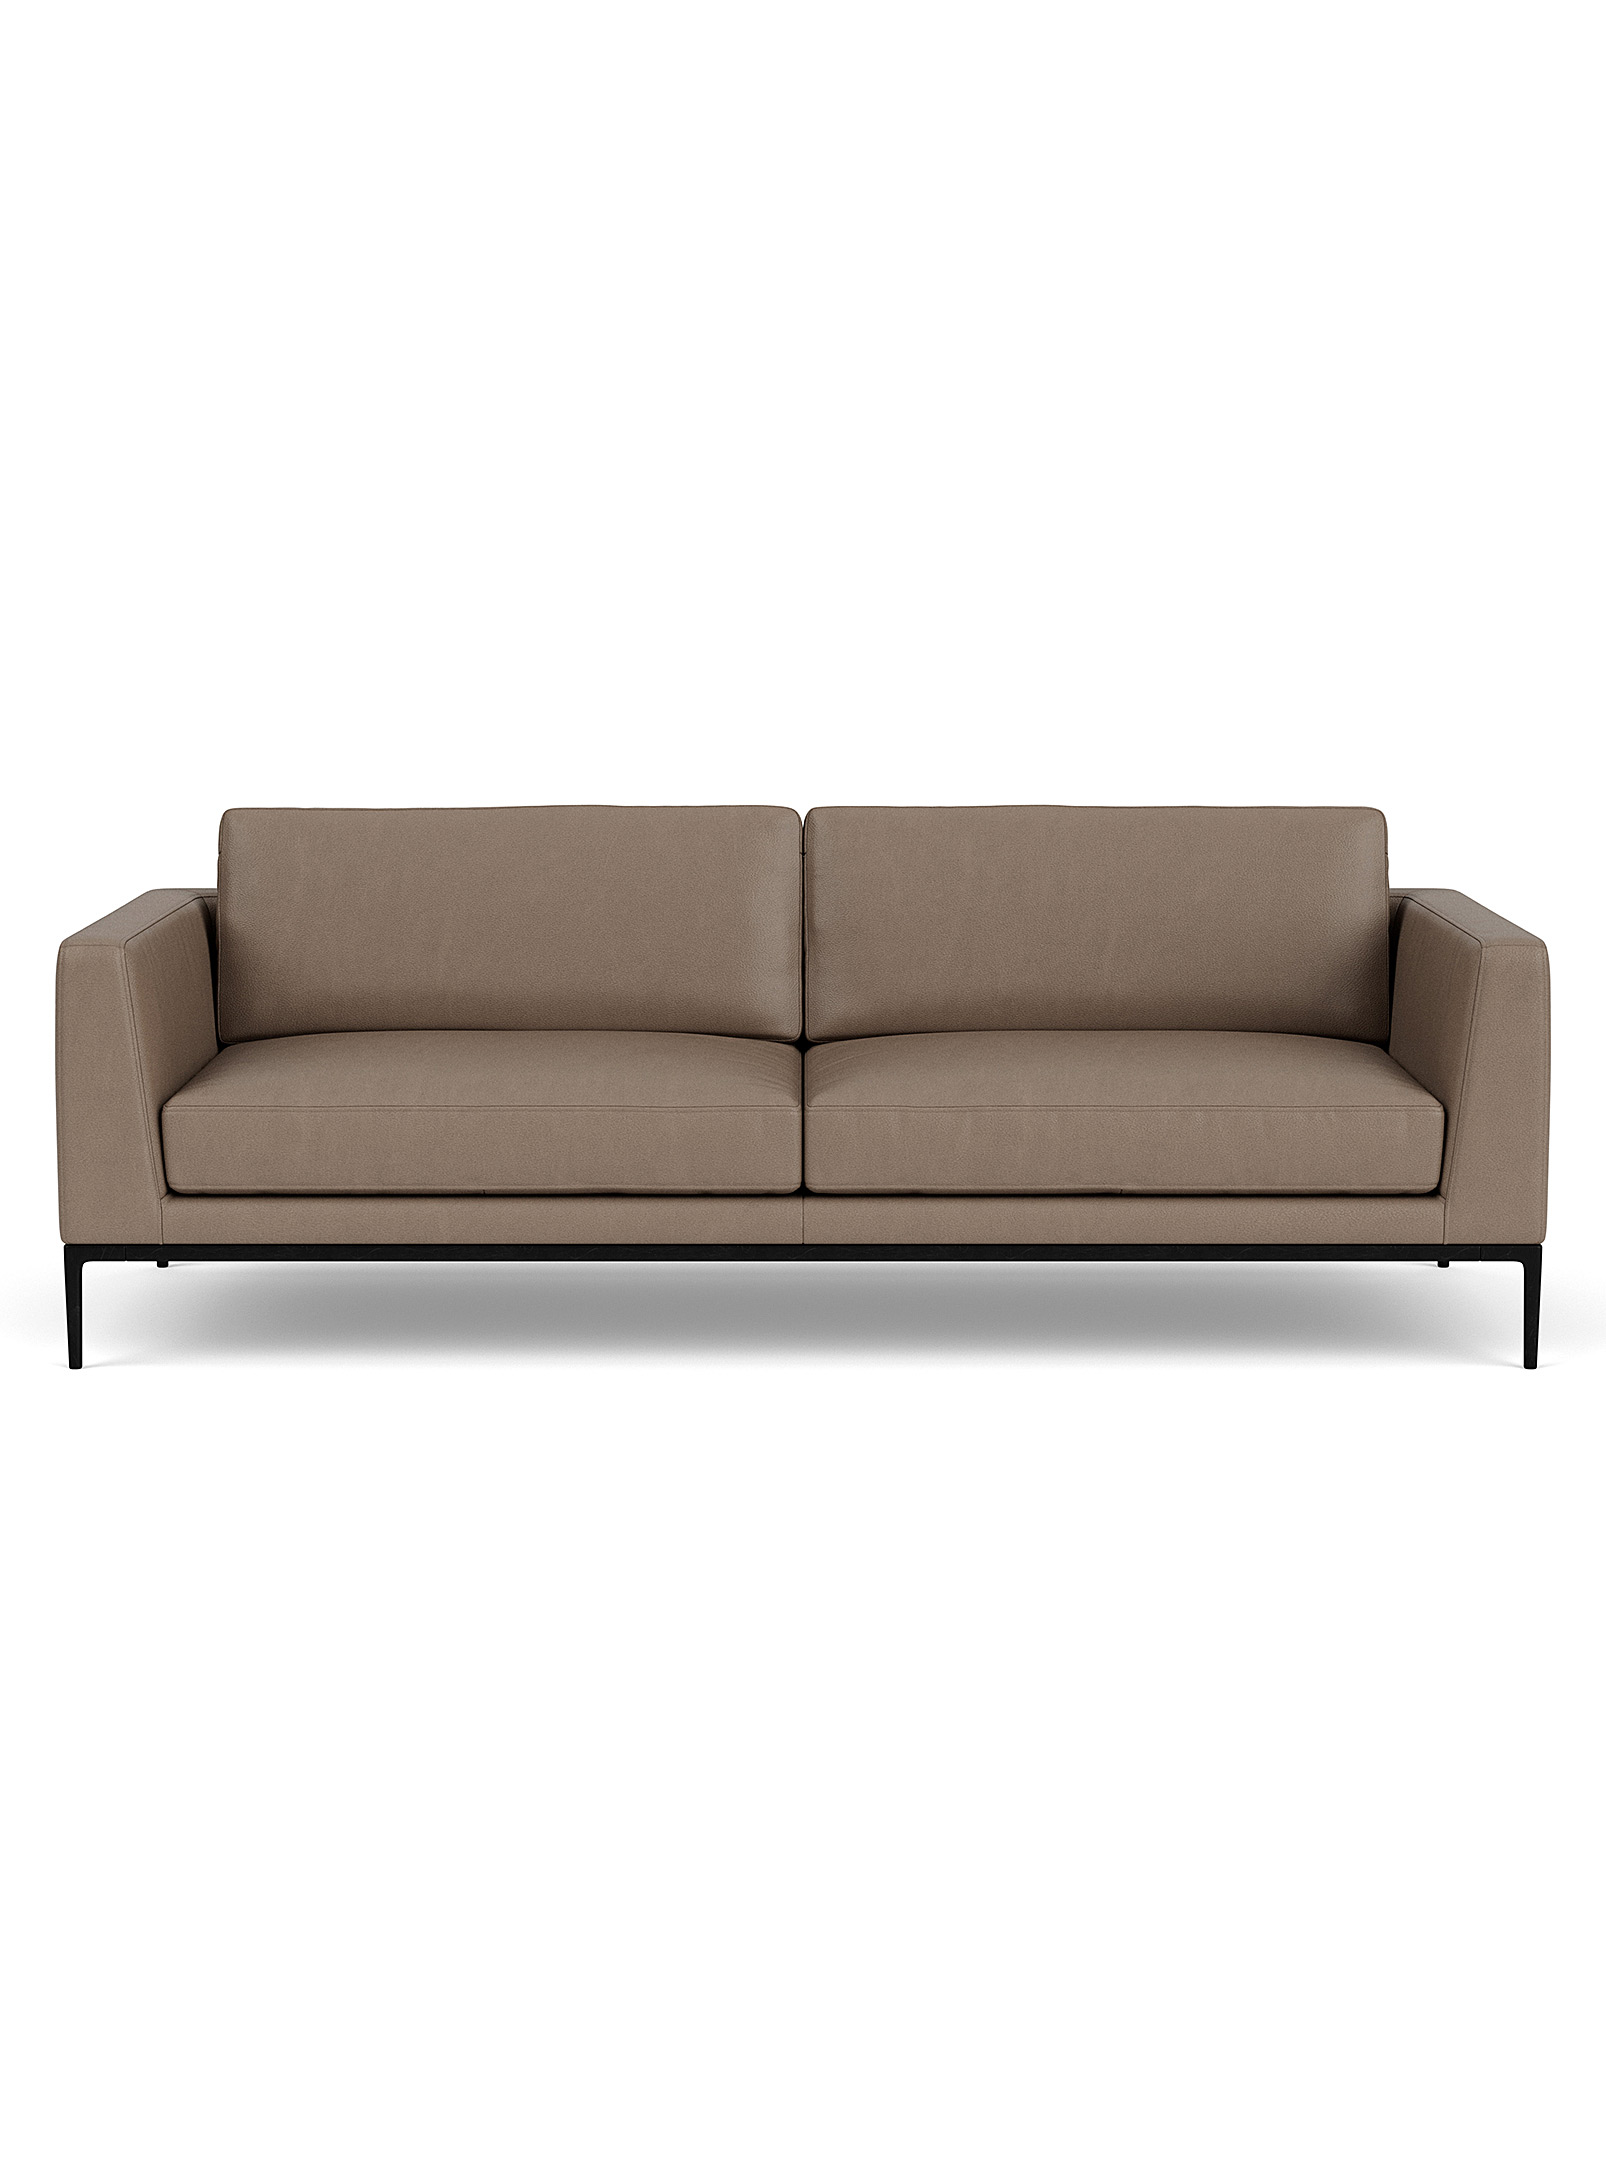 Eq3 Oma Sleek Leather Couch In Light Brown